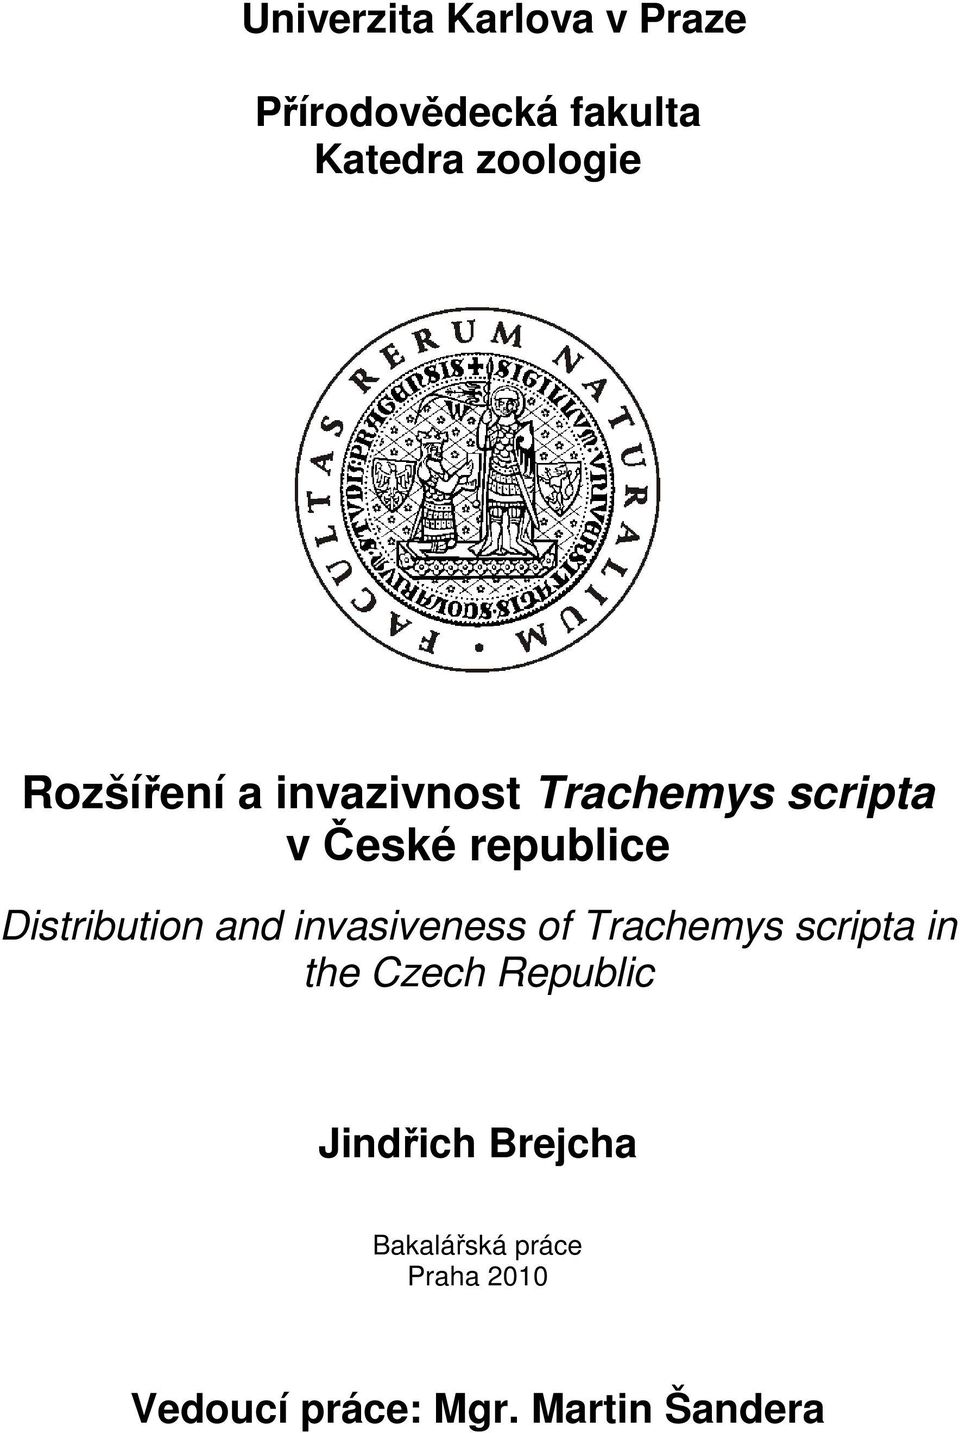 Distribution and invasiveness of Trachemys scripta in the Czech